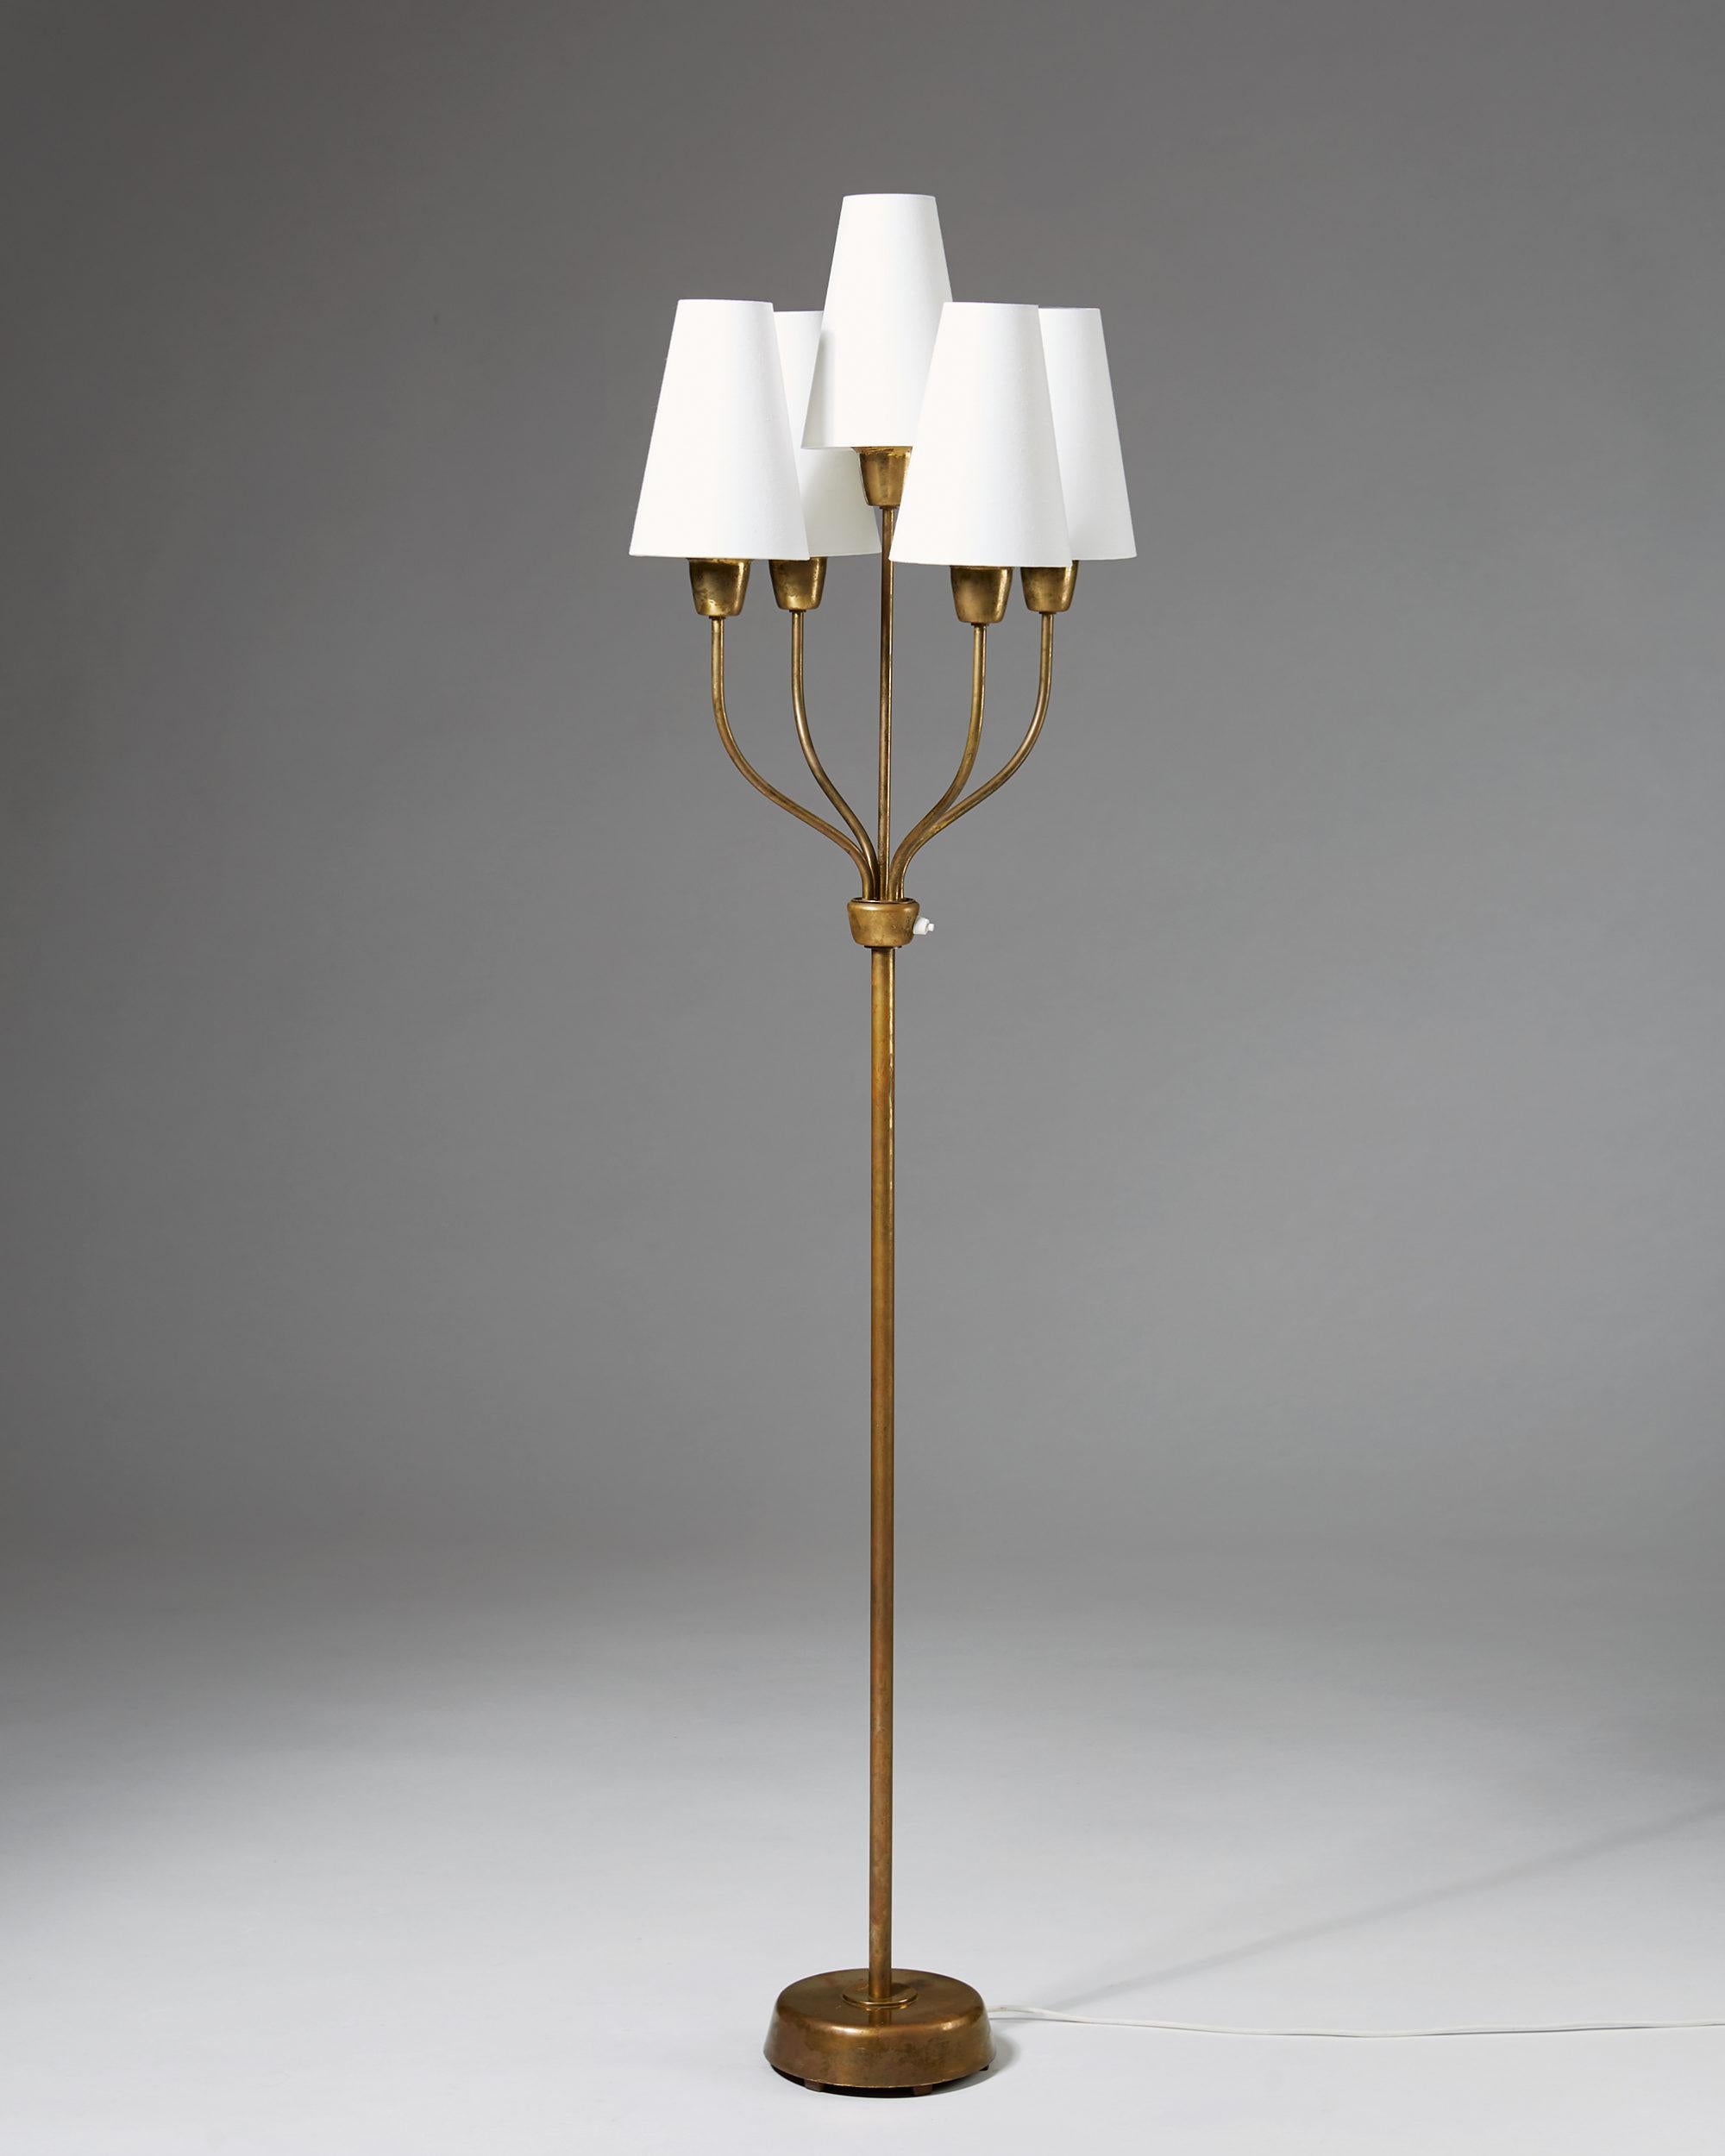 Brass and textile shades.

Measures: H 162 cm/ 5' 4